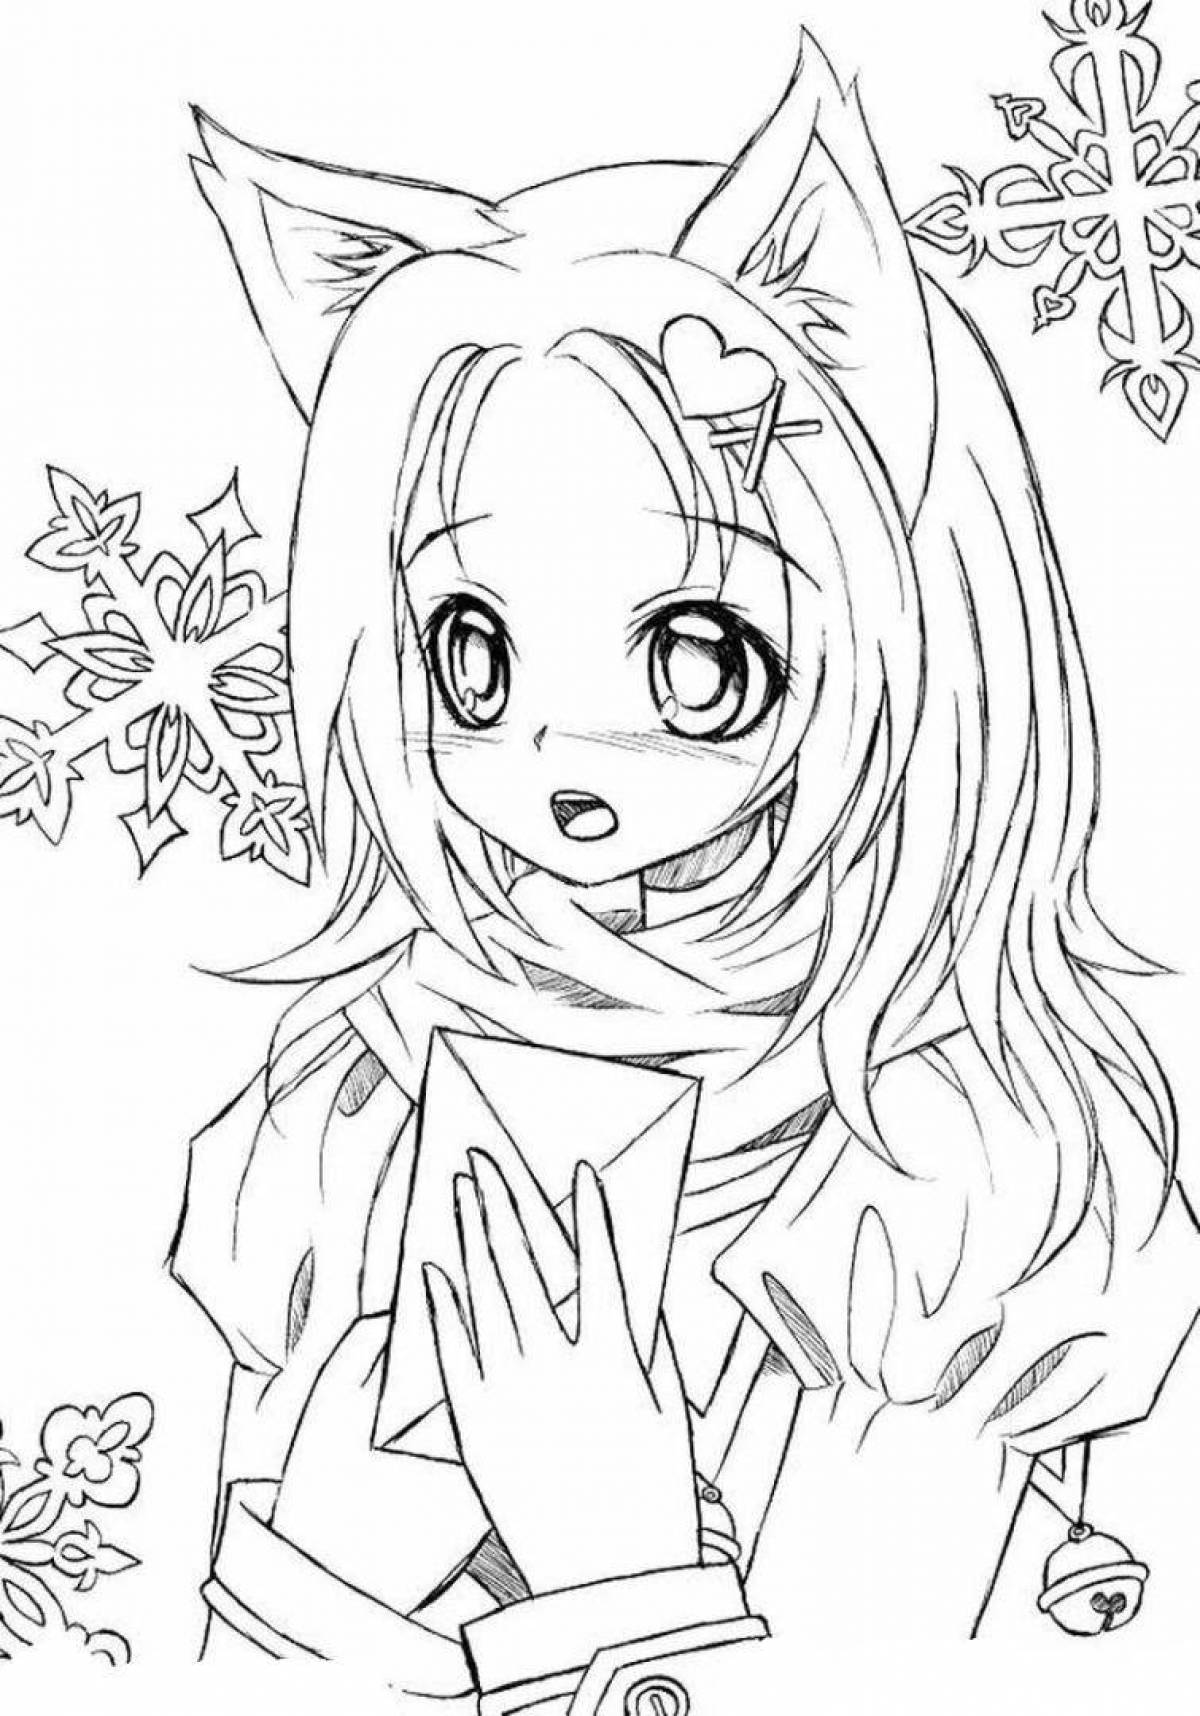 Amazing anime people coloring pages